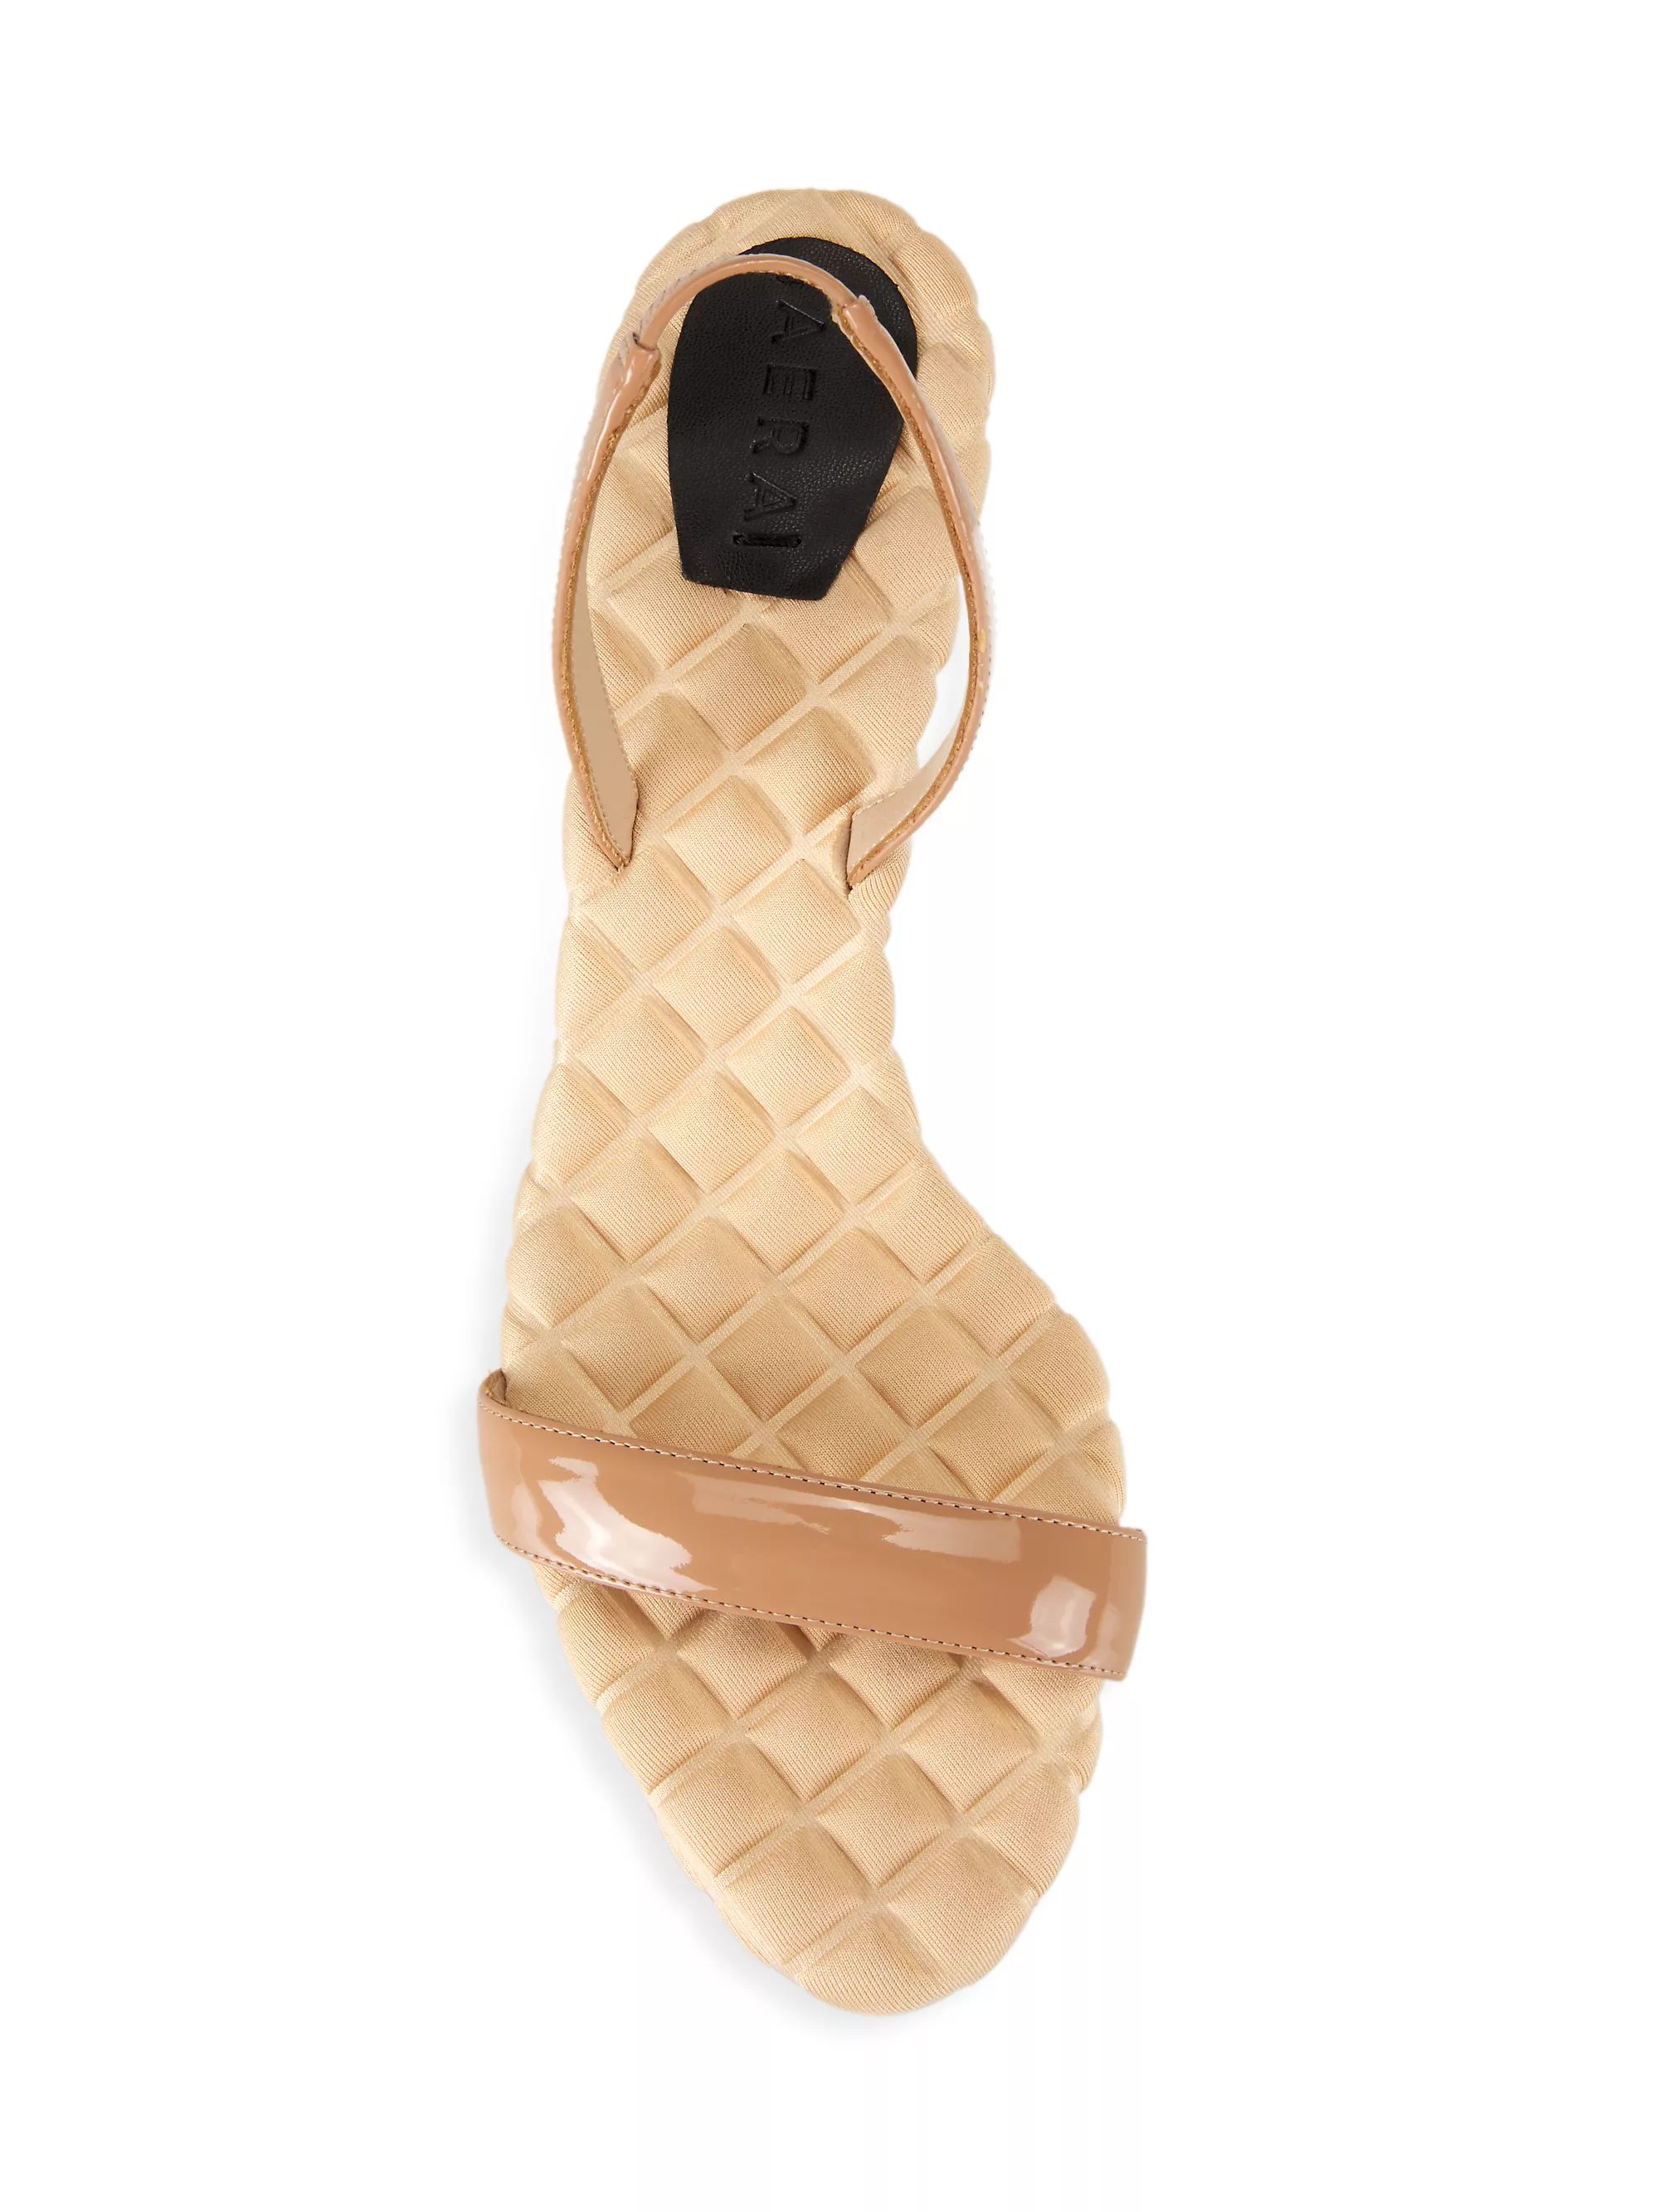 Shop Aera Claudia Quilted Slingback Sandals | Saks Fifth Avenue | Saks Fifth Avenue